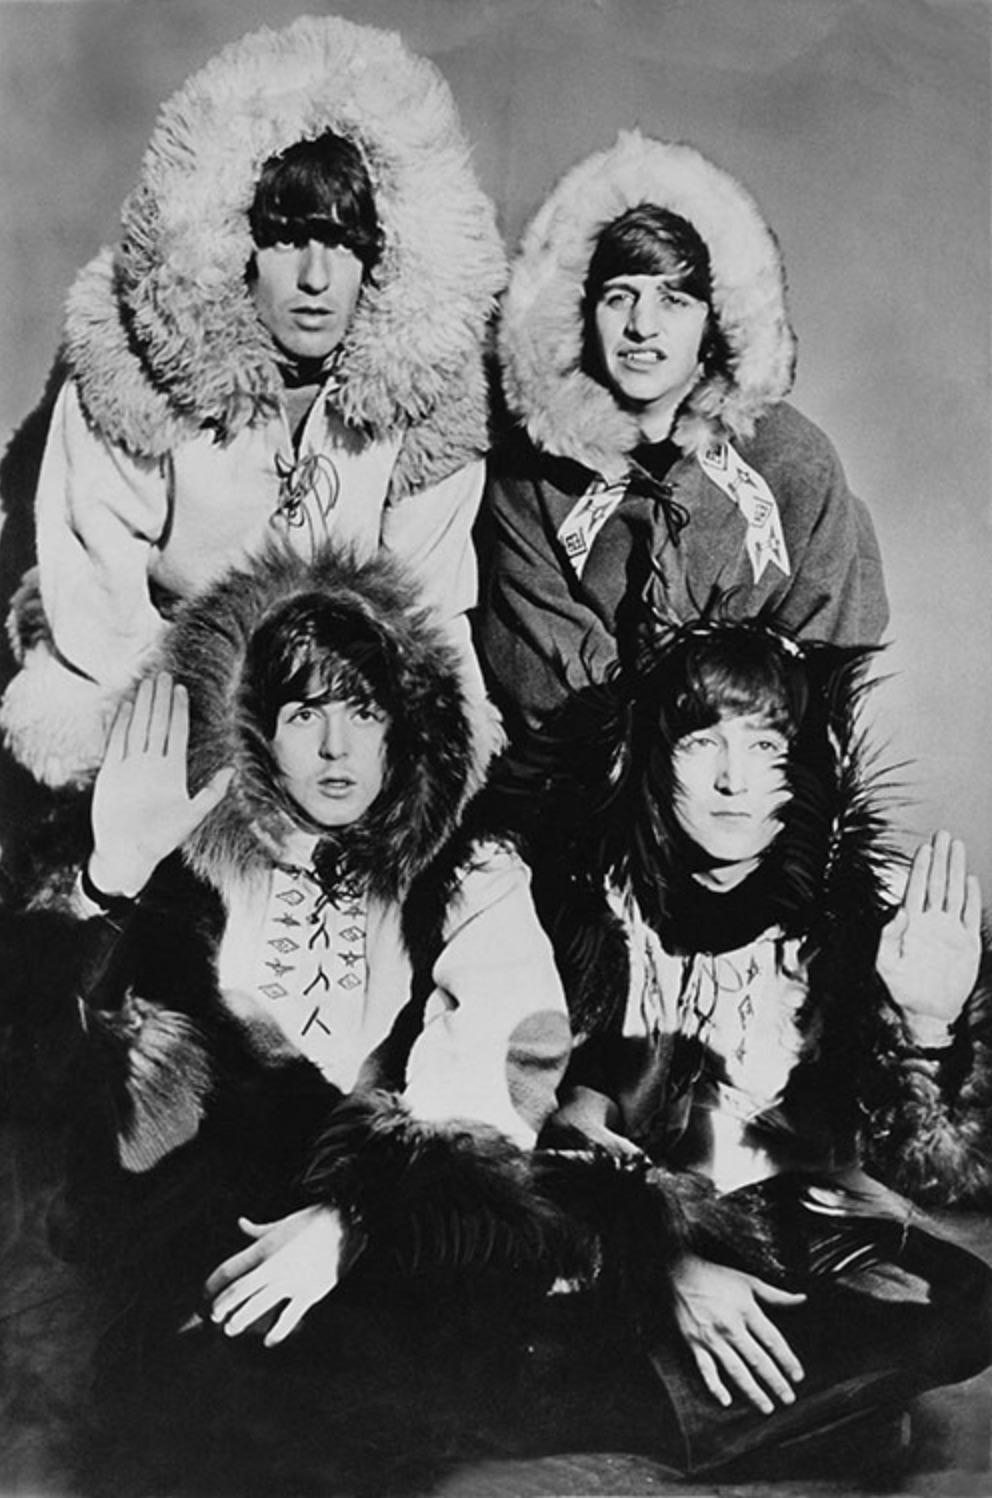 Terry O'Neill Black and White Photograph - The Beatles in Furs